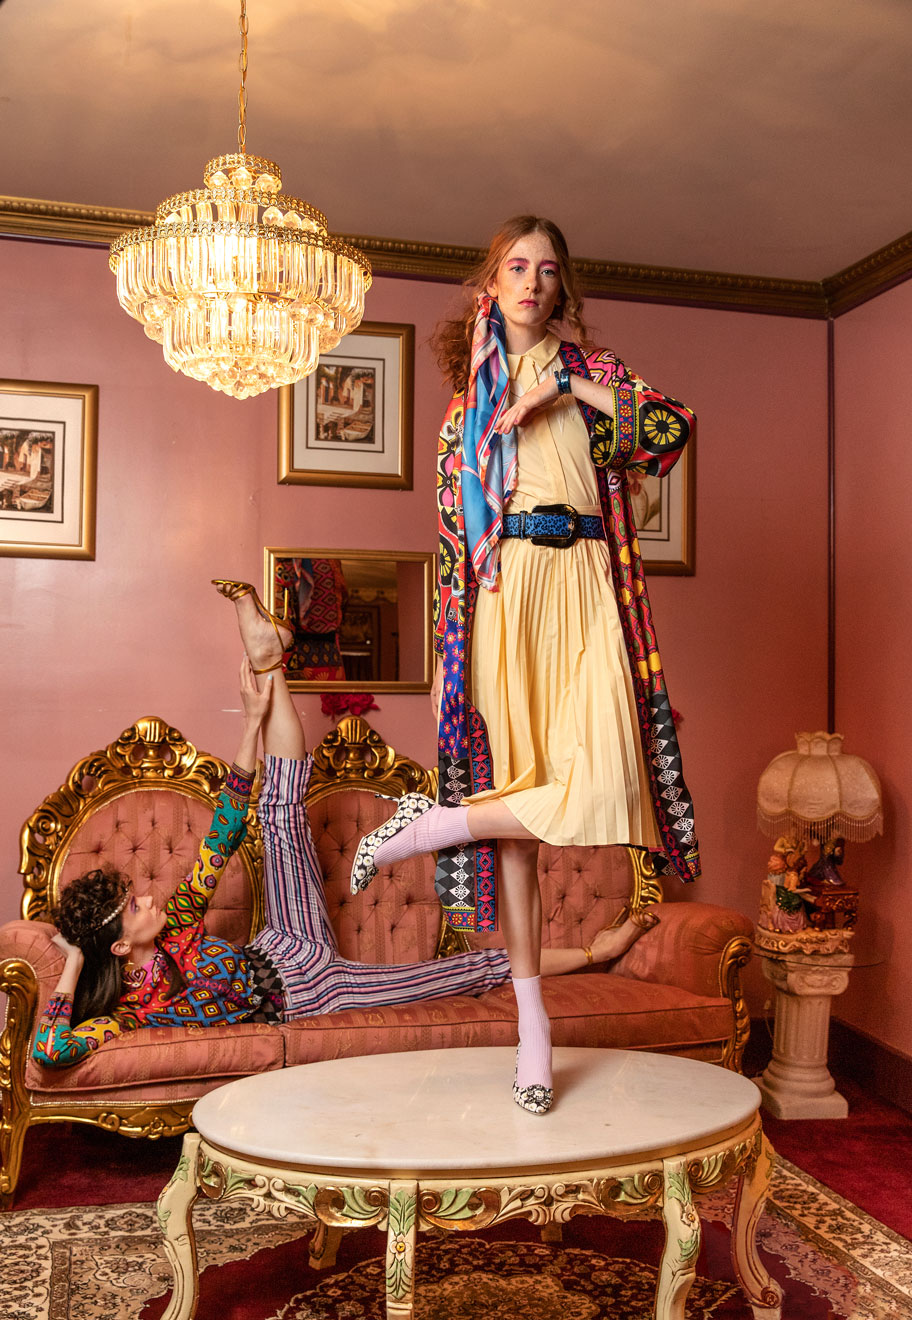 House of Rainbow Dreams - by Colleen Chrzanowski and Elizabeth Margulis ...